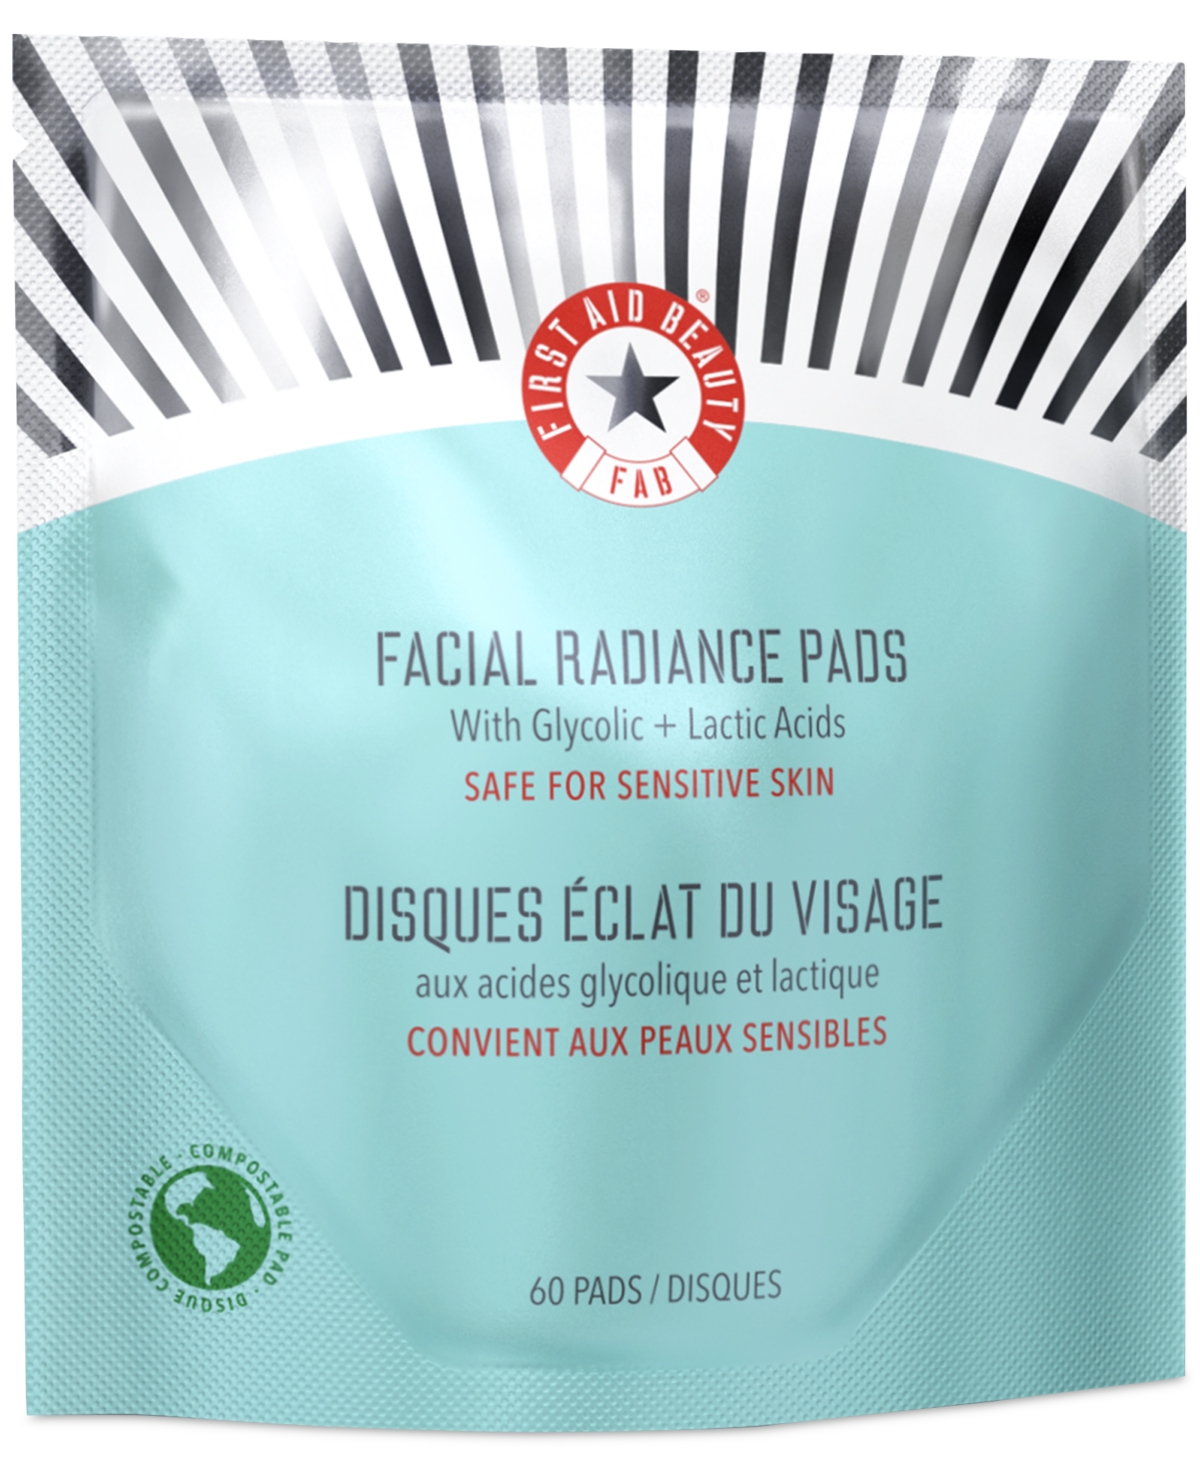 FIRST AID BEAUTY FACIAL RADIANCE PADS, 60 PADS